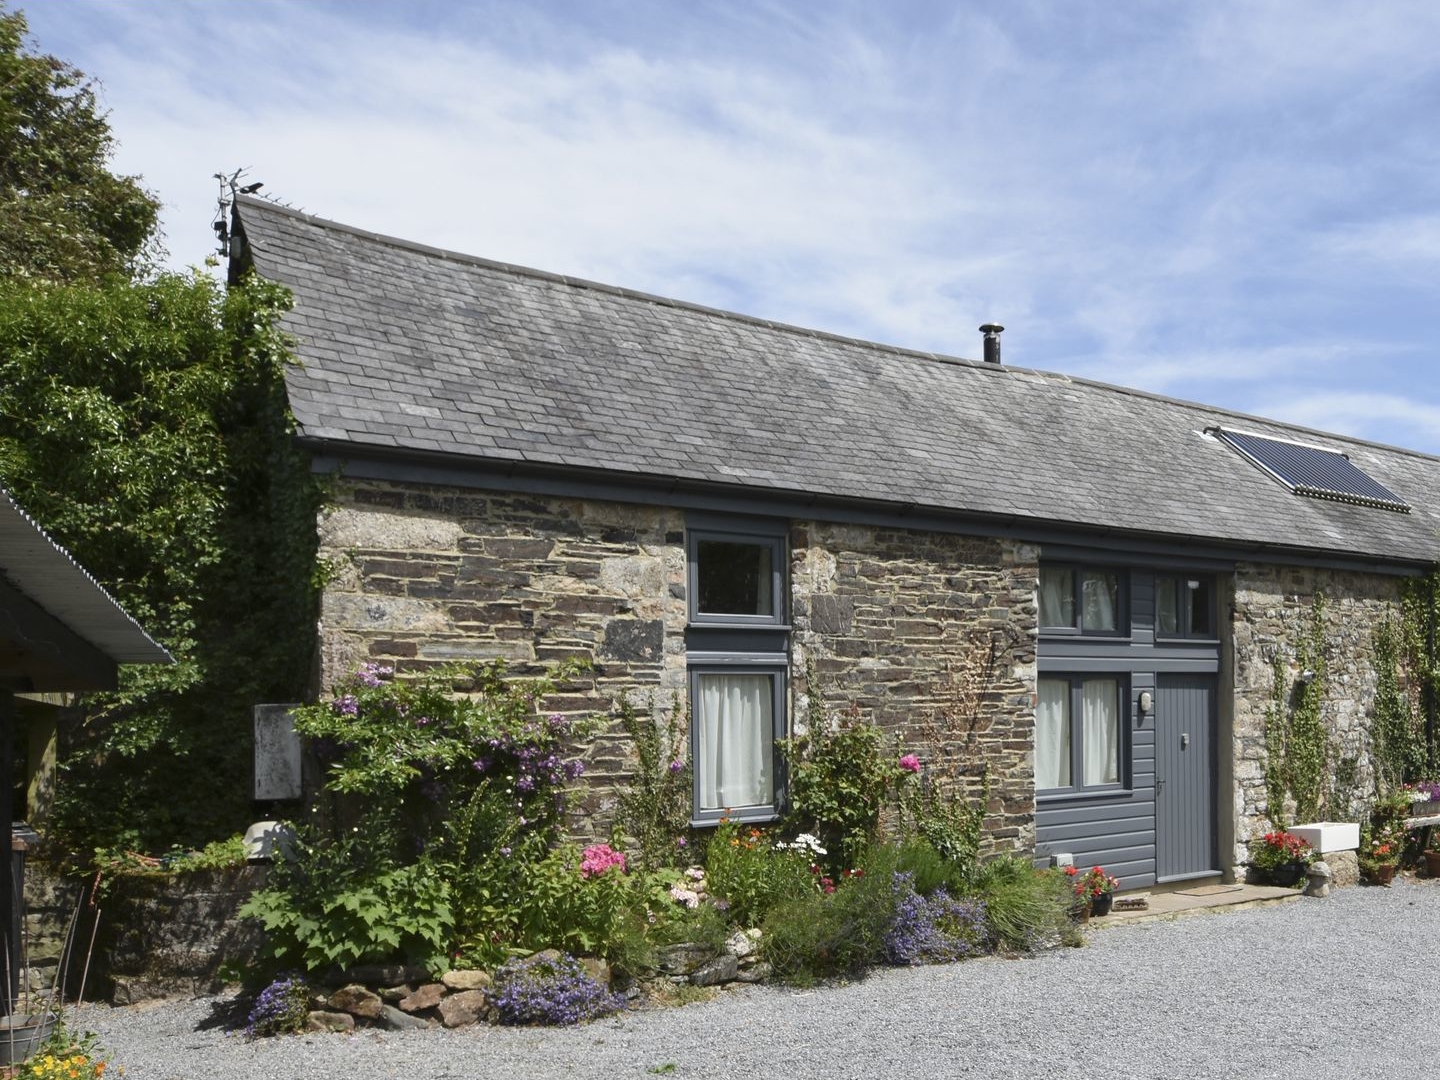 Holiday cottages in Devon: The Stone Barn Cottage, Holne | sykescottages.co.uk 